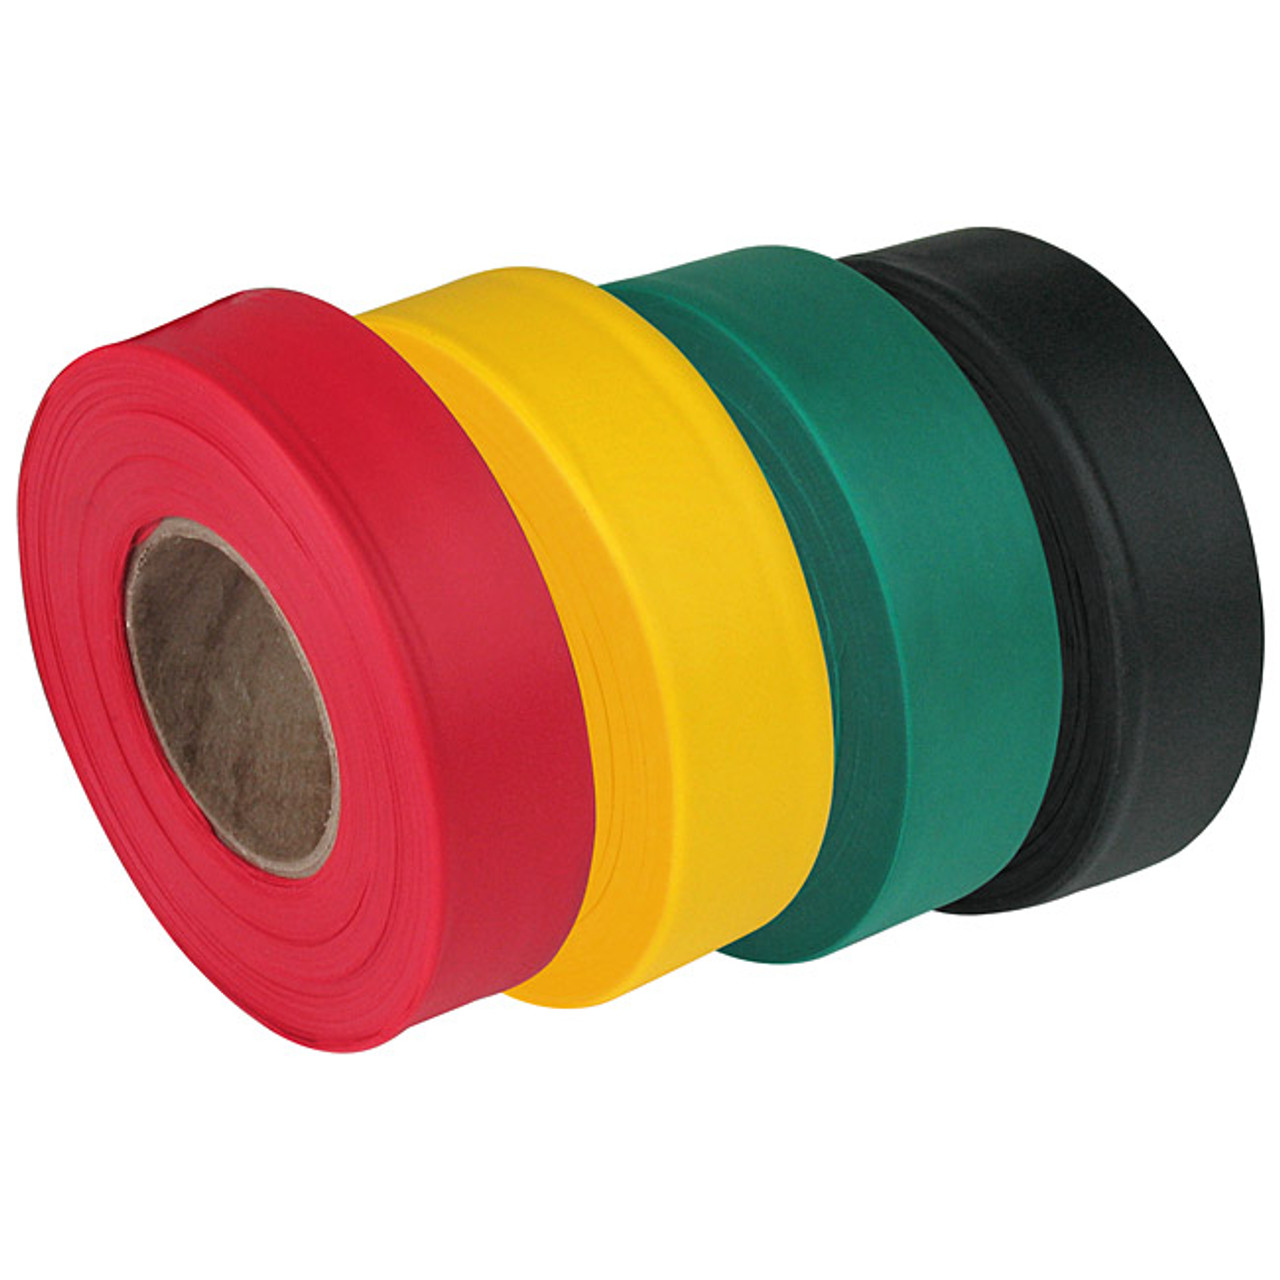 Triage Tape Set 4 colors - Delayed - Immediate - Minor - Morgue - Each Roll  200' - CERT Kits Supplies